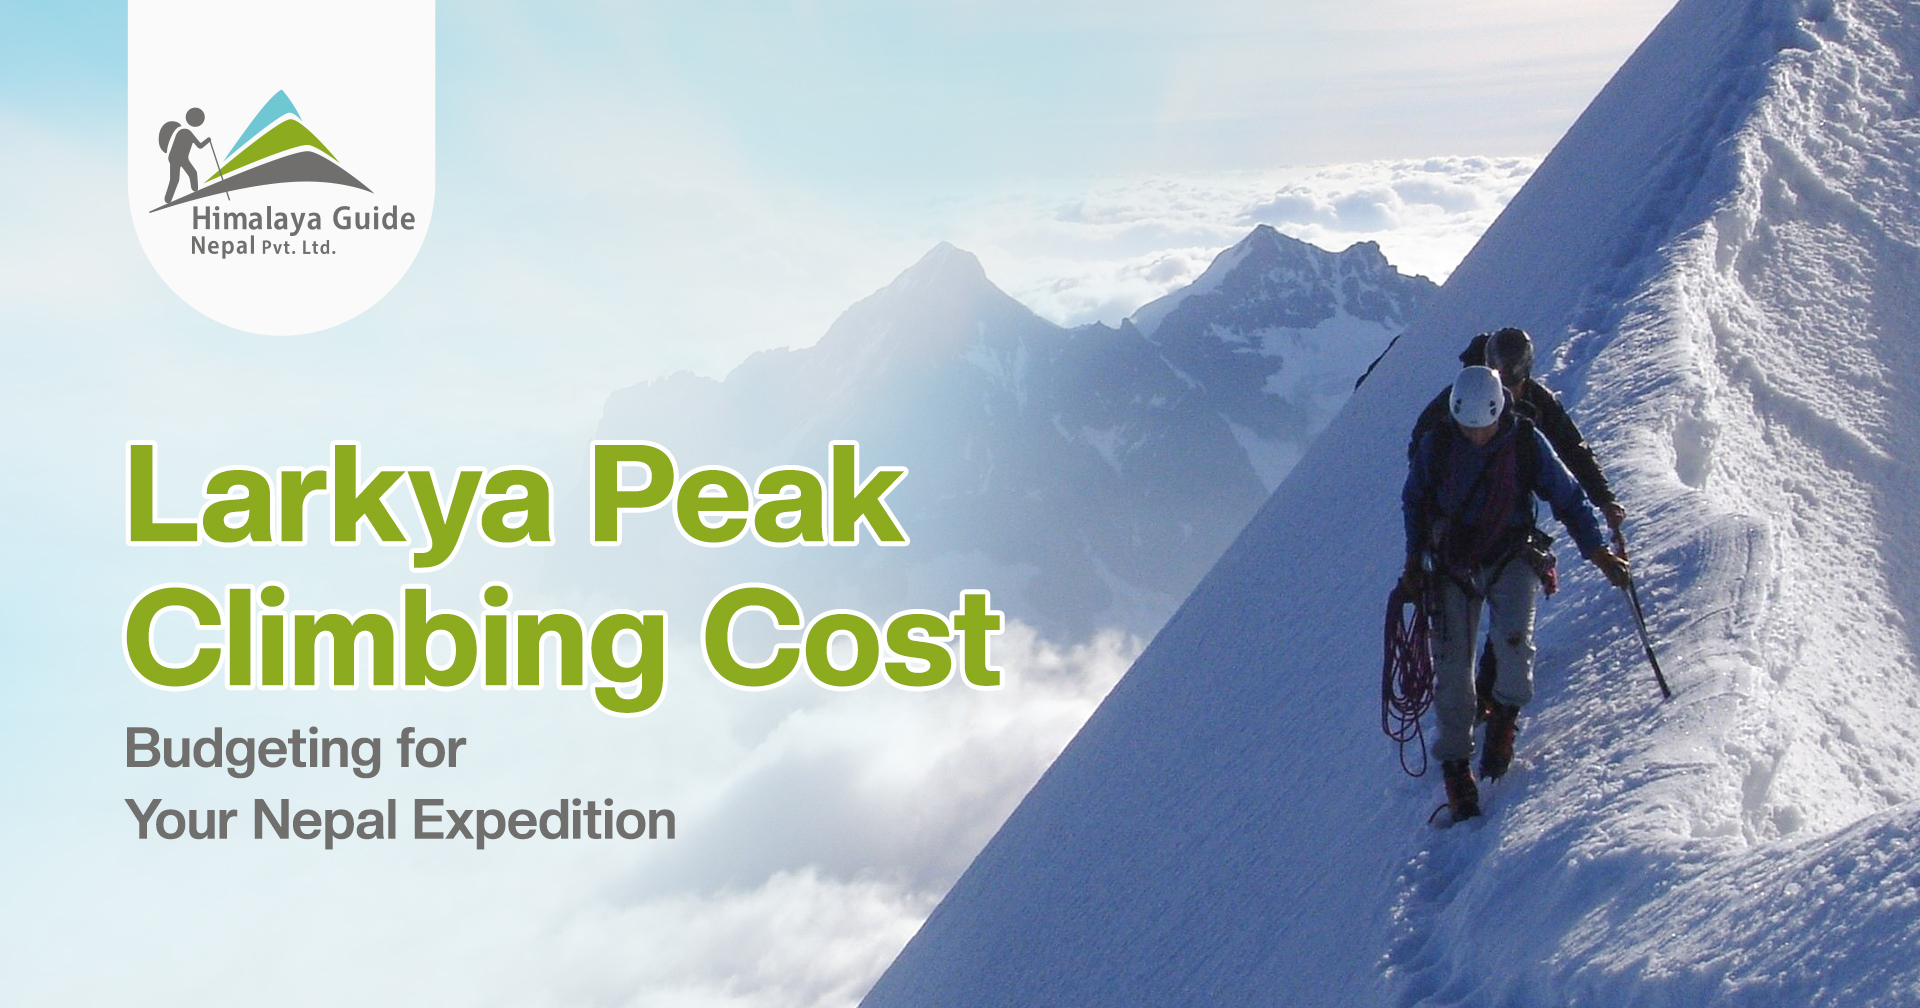 Larkya Peak Climbing Cost: Budgeting for Your Nepal Expedition